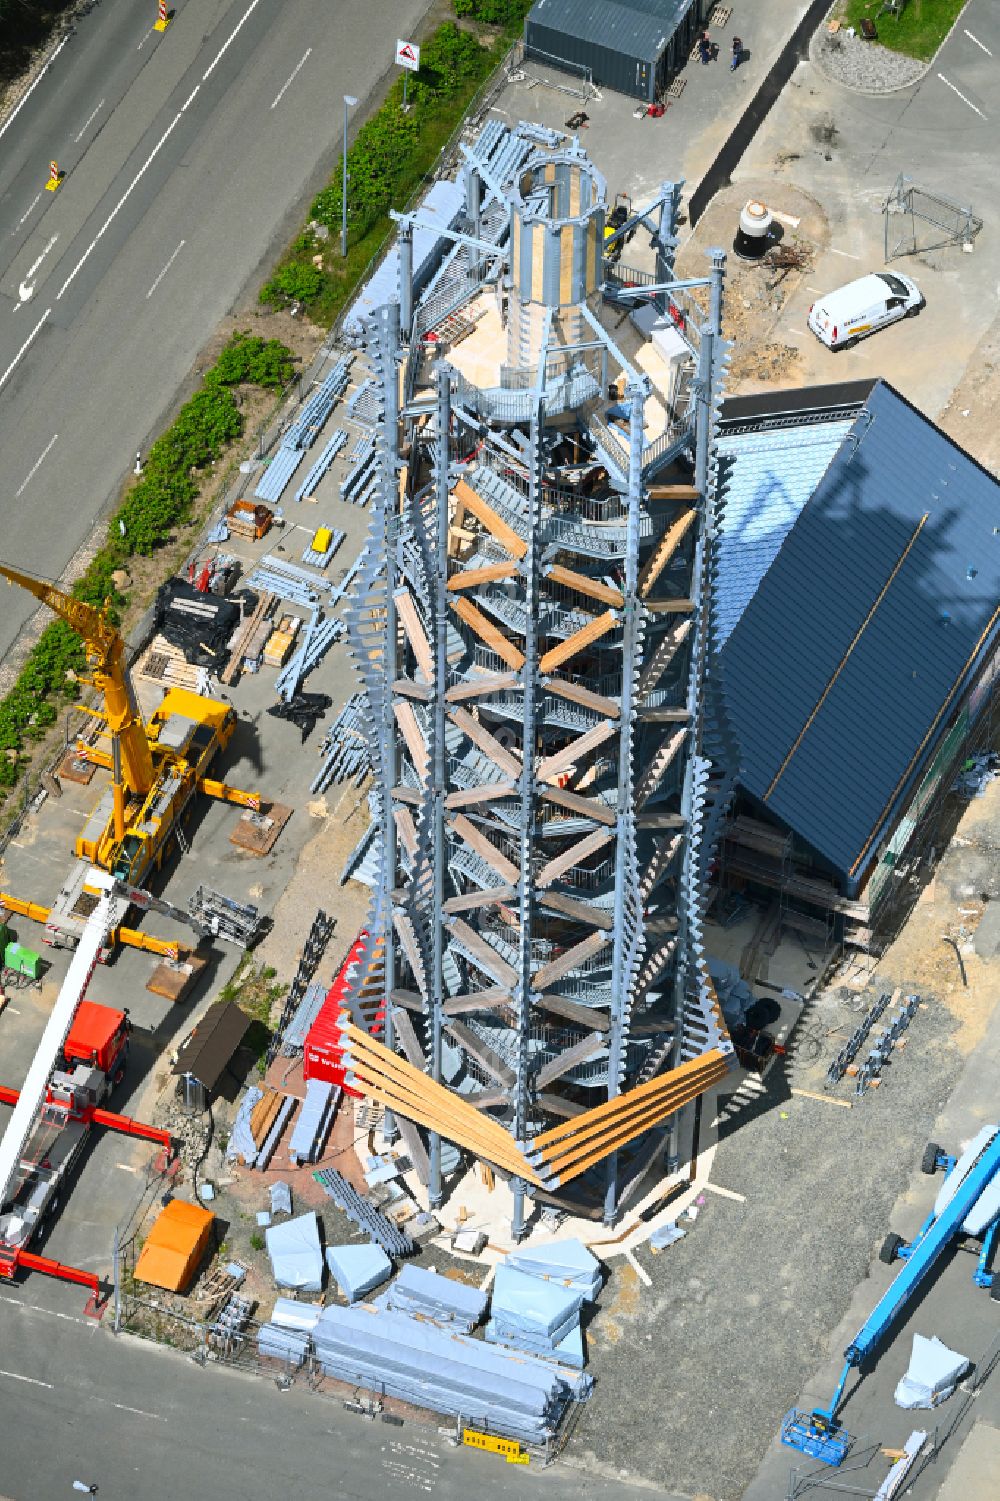 Torfhaus from the bird's eye view: Construction of the new building of the observation tower of Harzturm GmbH in Torfhaus in the Harz in the state Lower Saxony, Germany